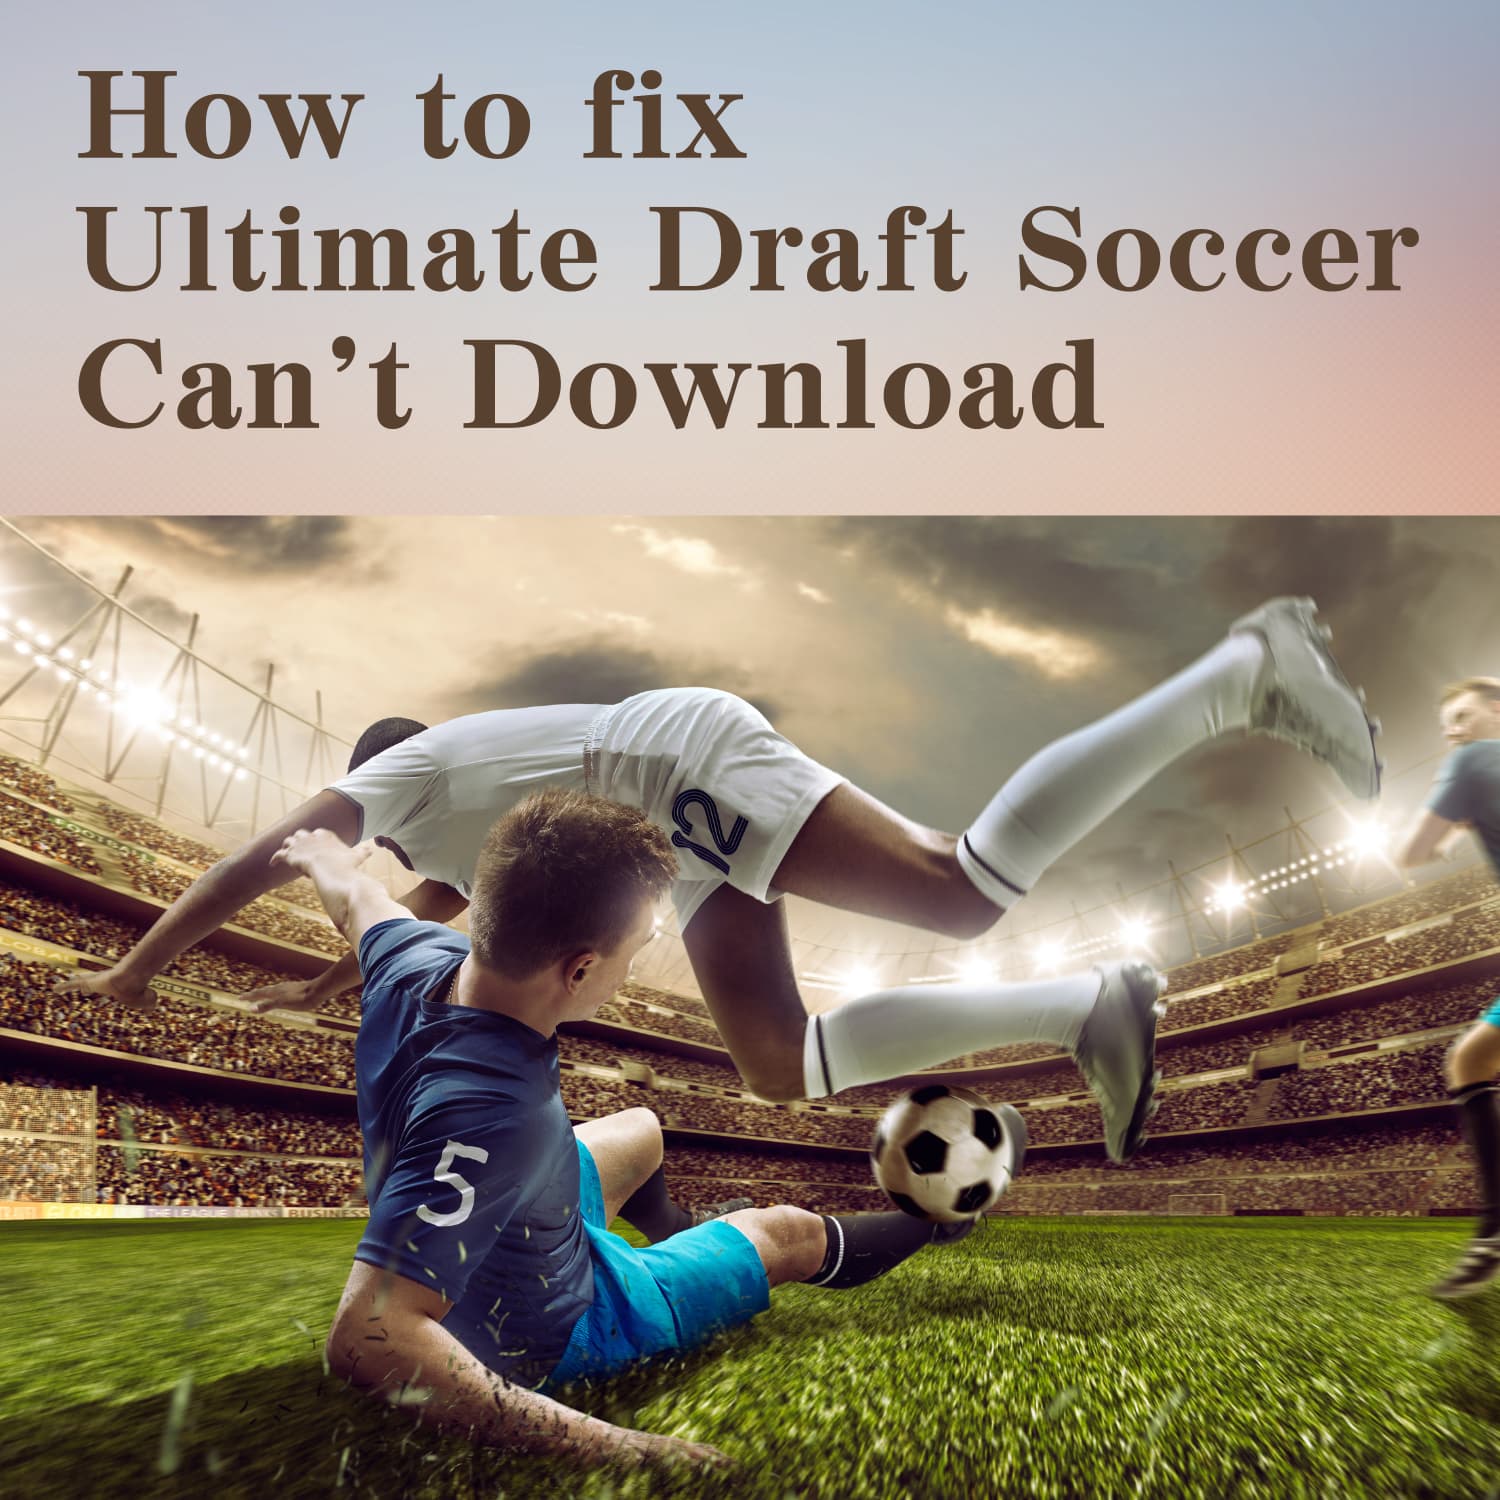 Troubleshooting Ultimate Draft Soccer App Download Issues: Causes and ...